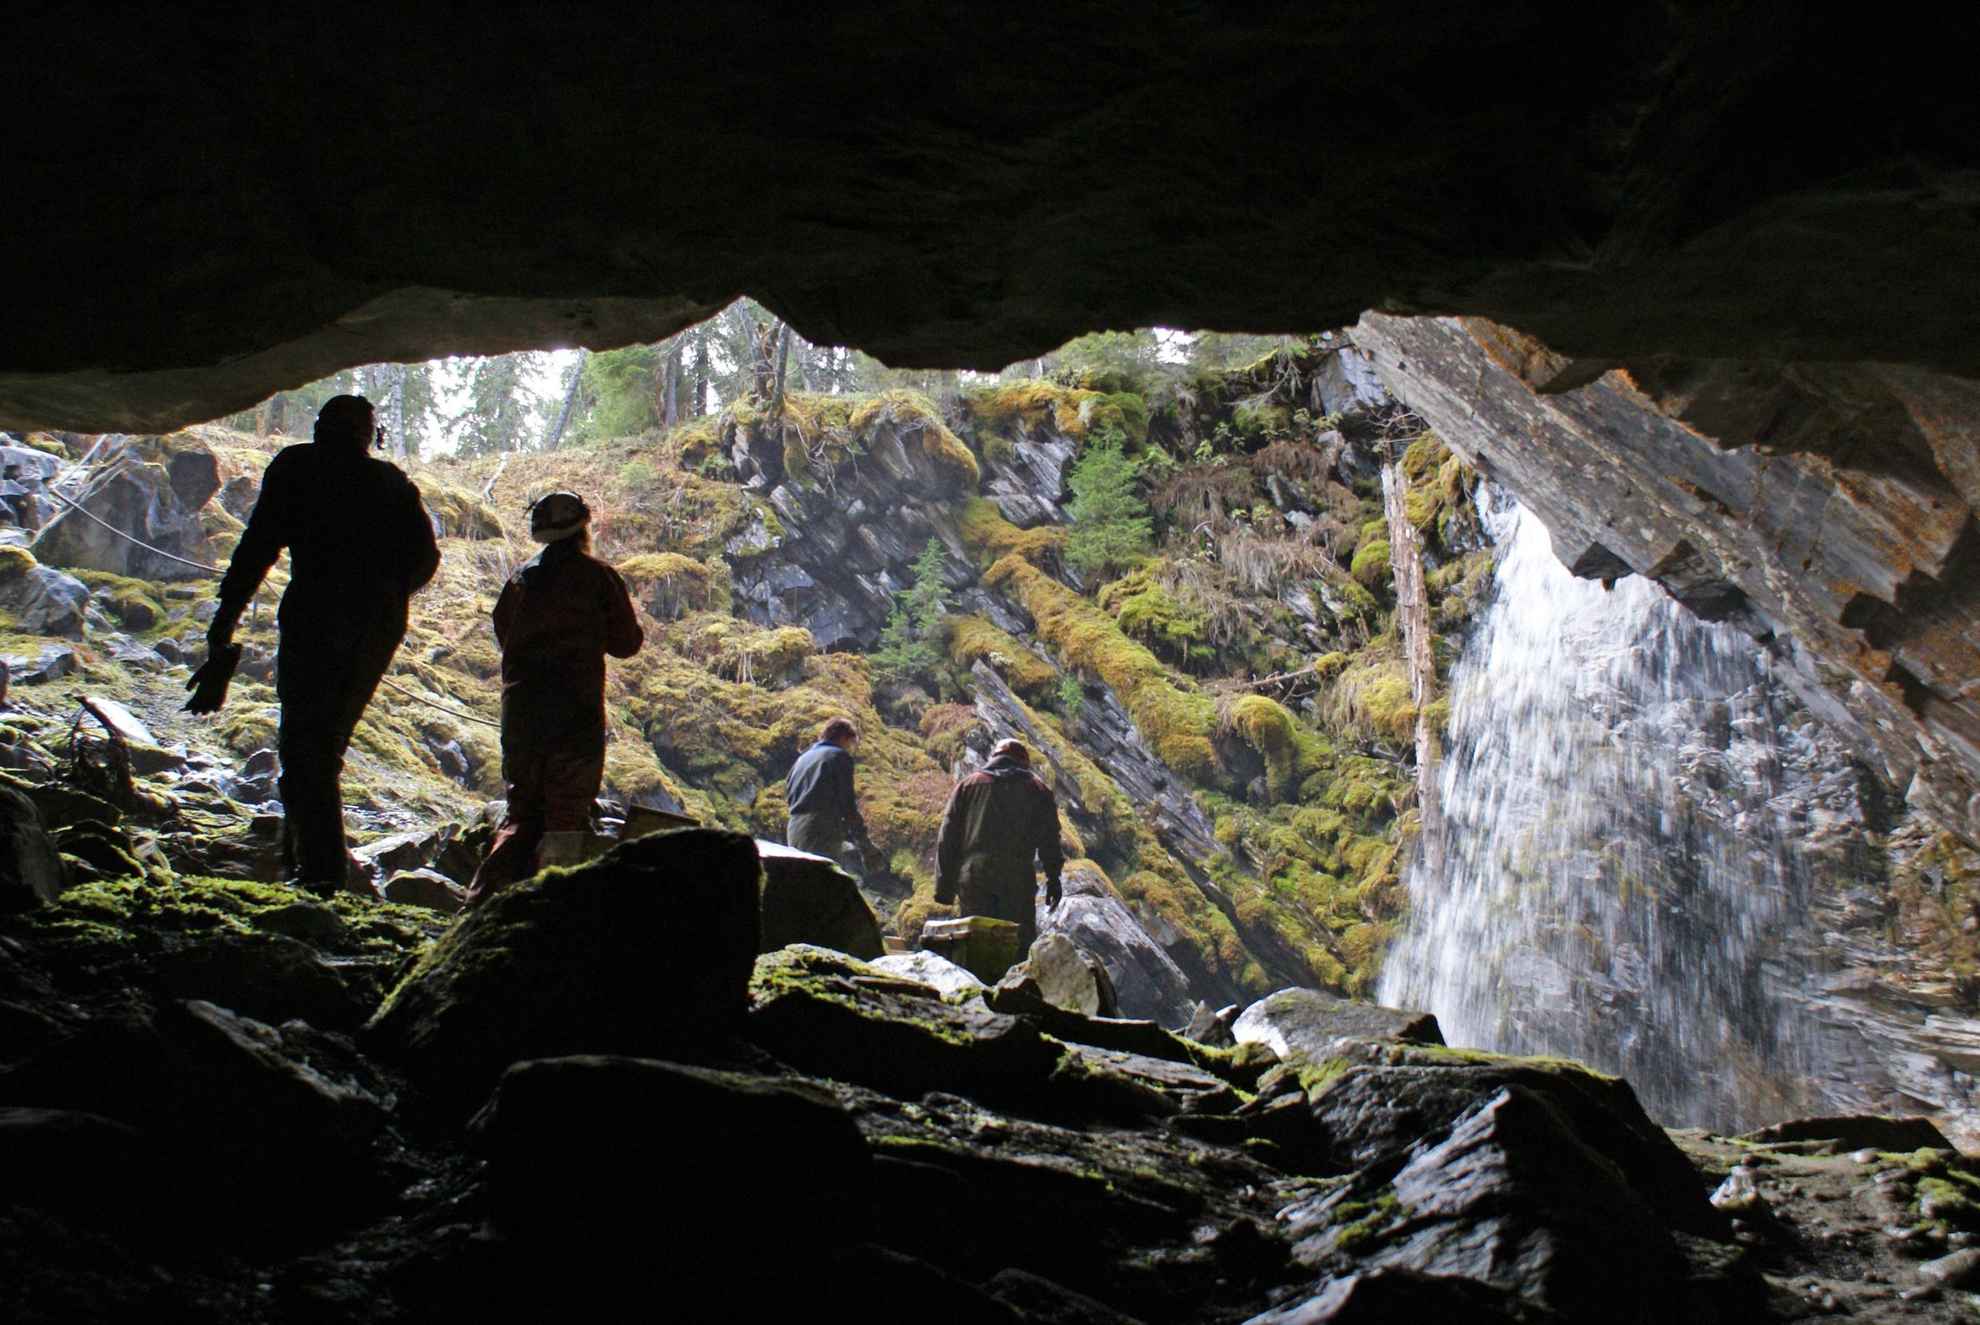 A view from inside a cave out into a glade with four people walking towards a waterfall.